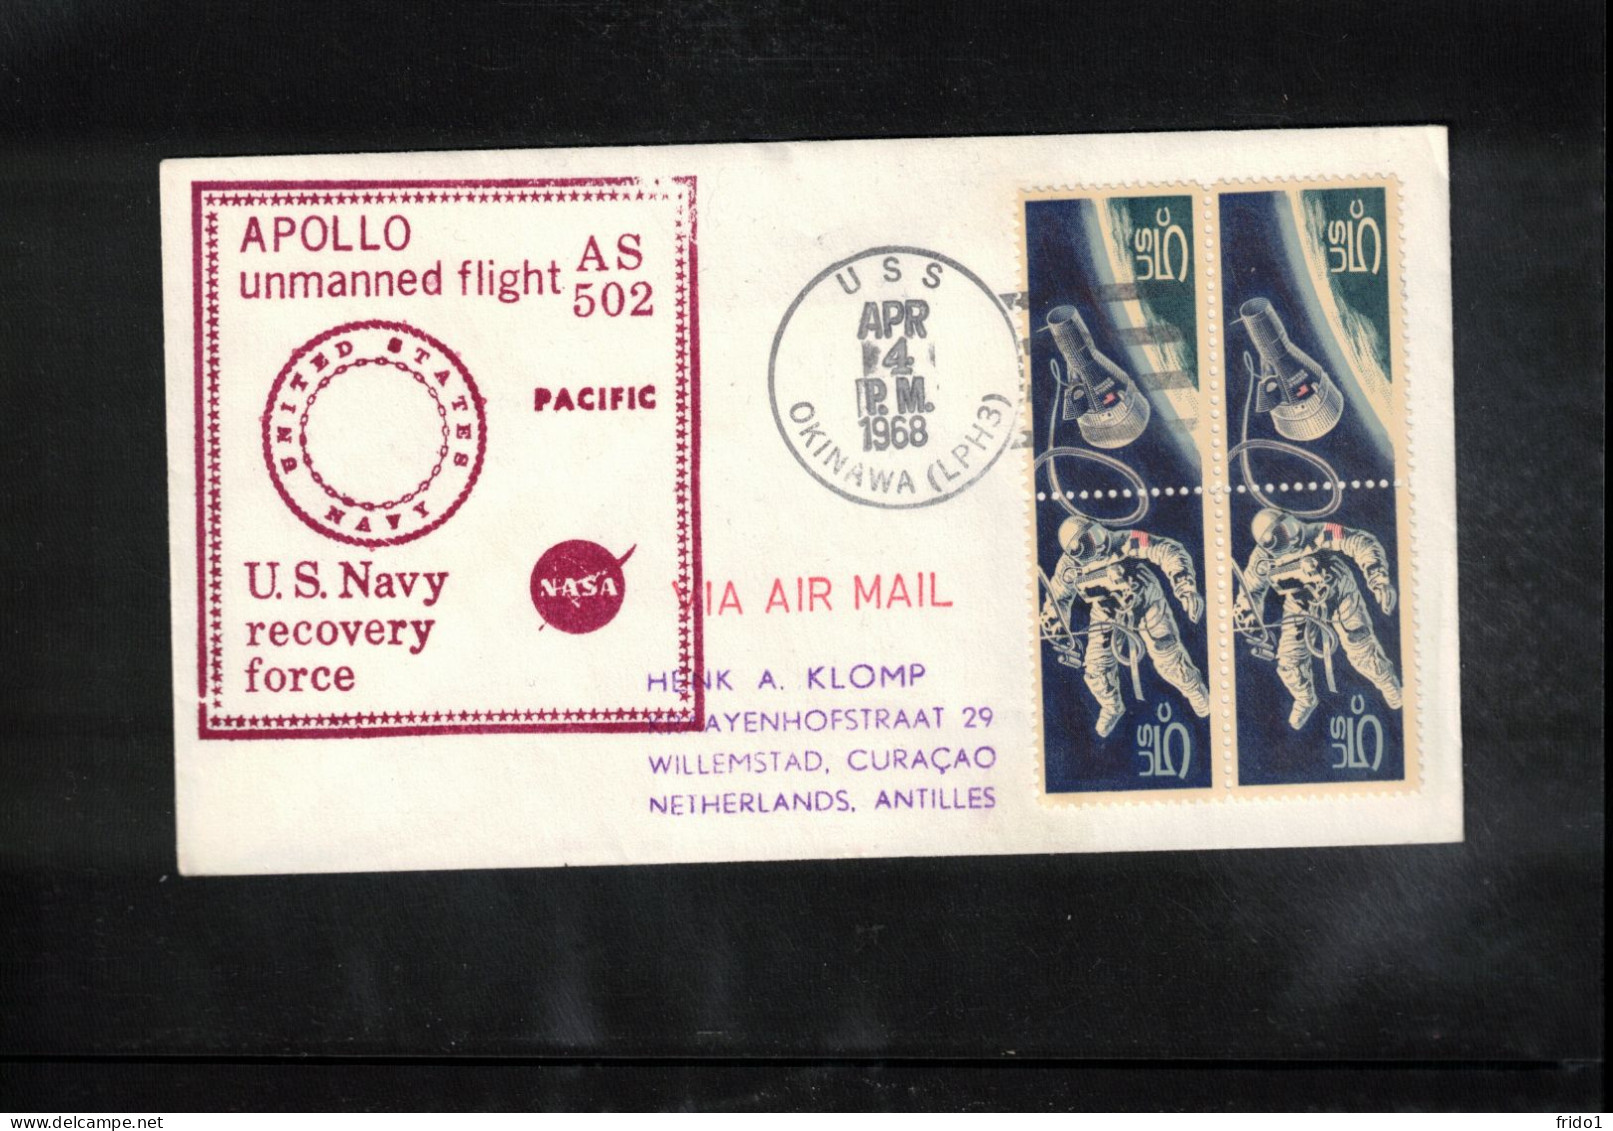 USA 1968 Space / Weltraum Apollo Unmanned Flight AS 502 - US Navy Recovery Force Ship USS Okinawa Interesting Cover - USA